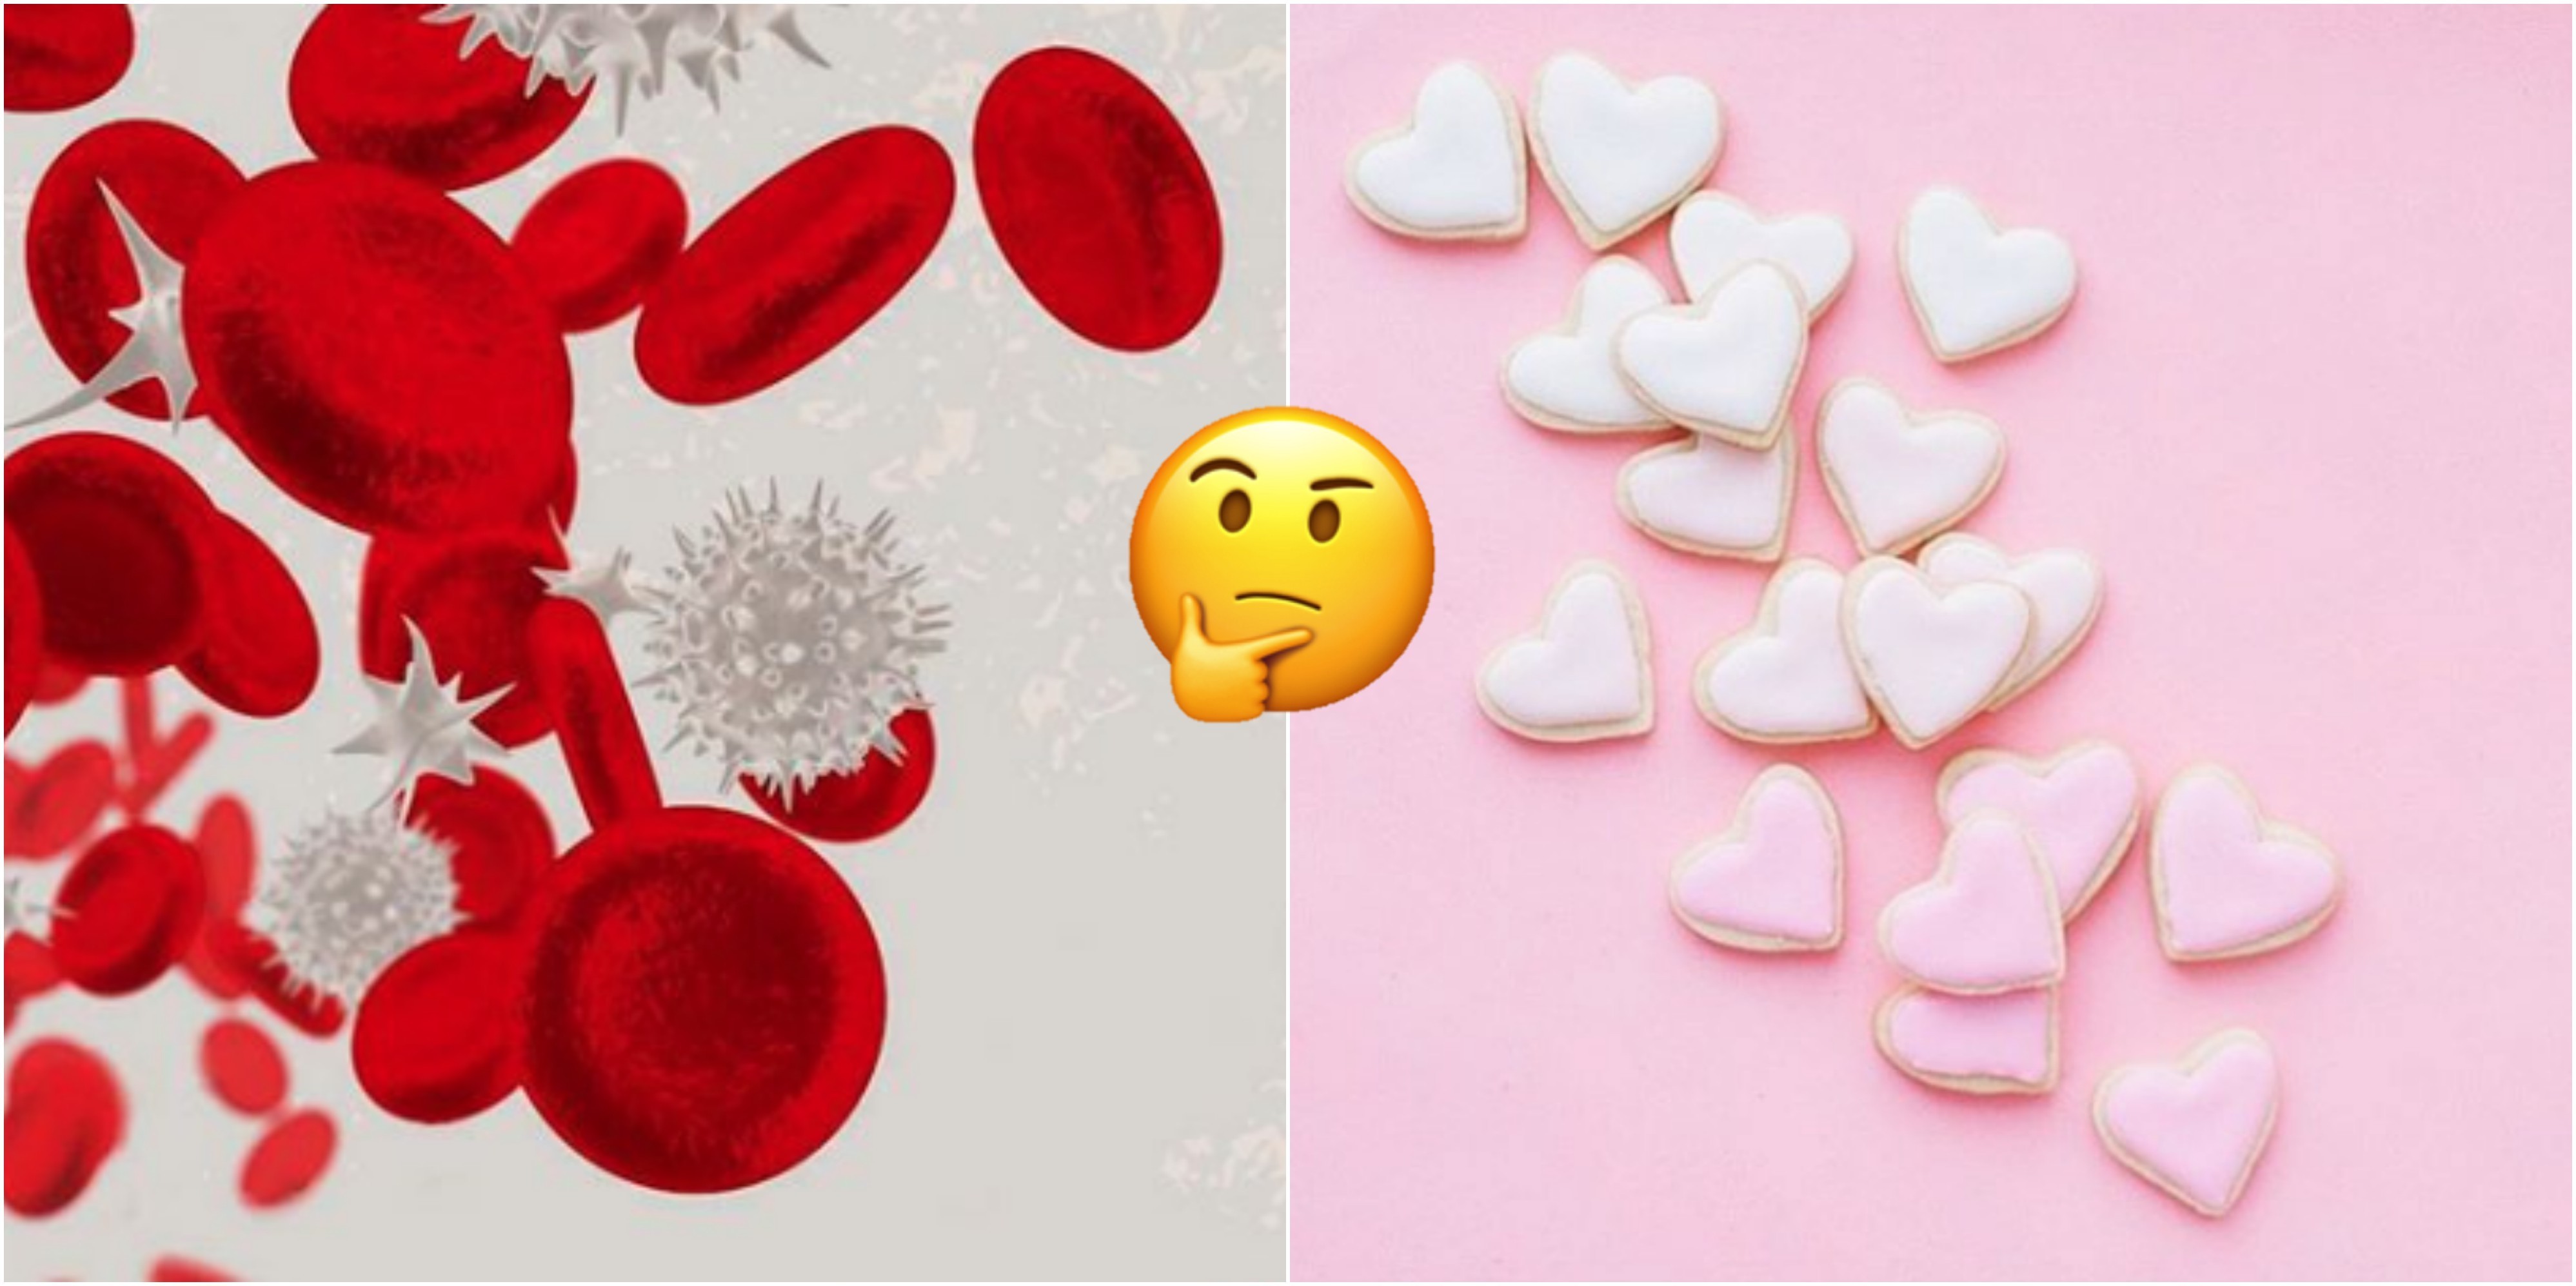 Seven Random And We'll Guess Your Blood Type